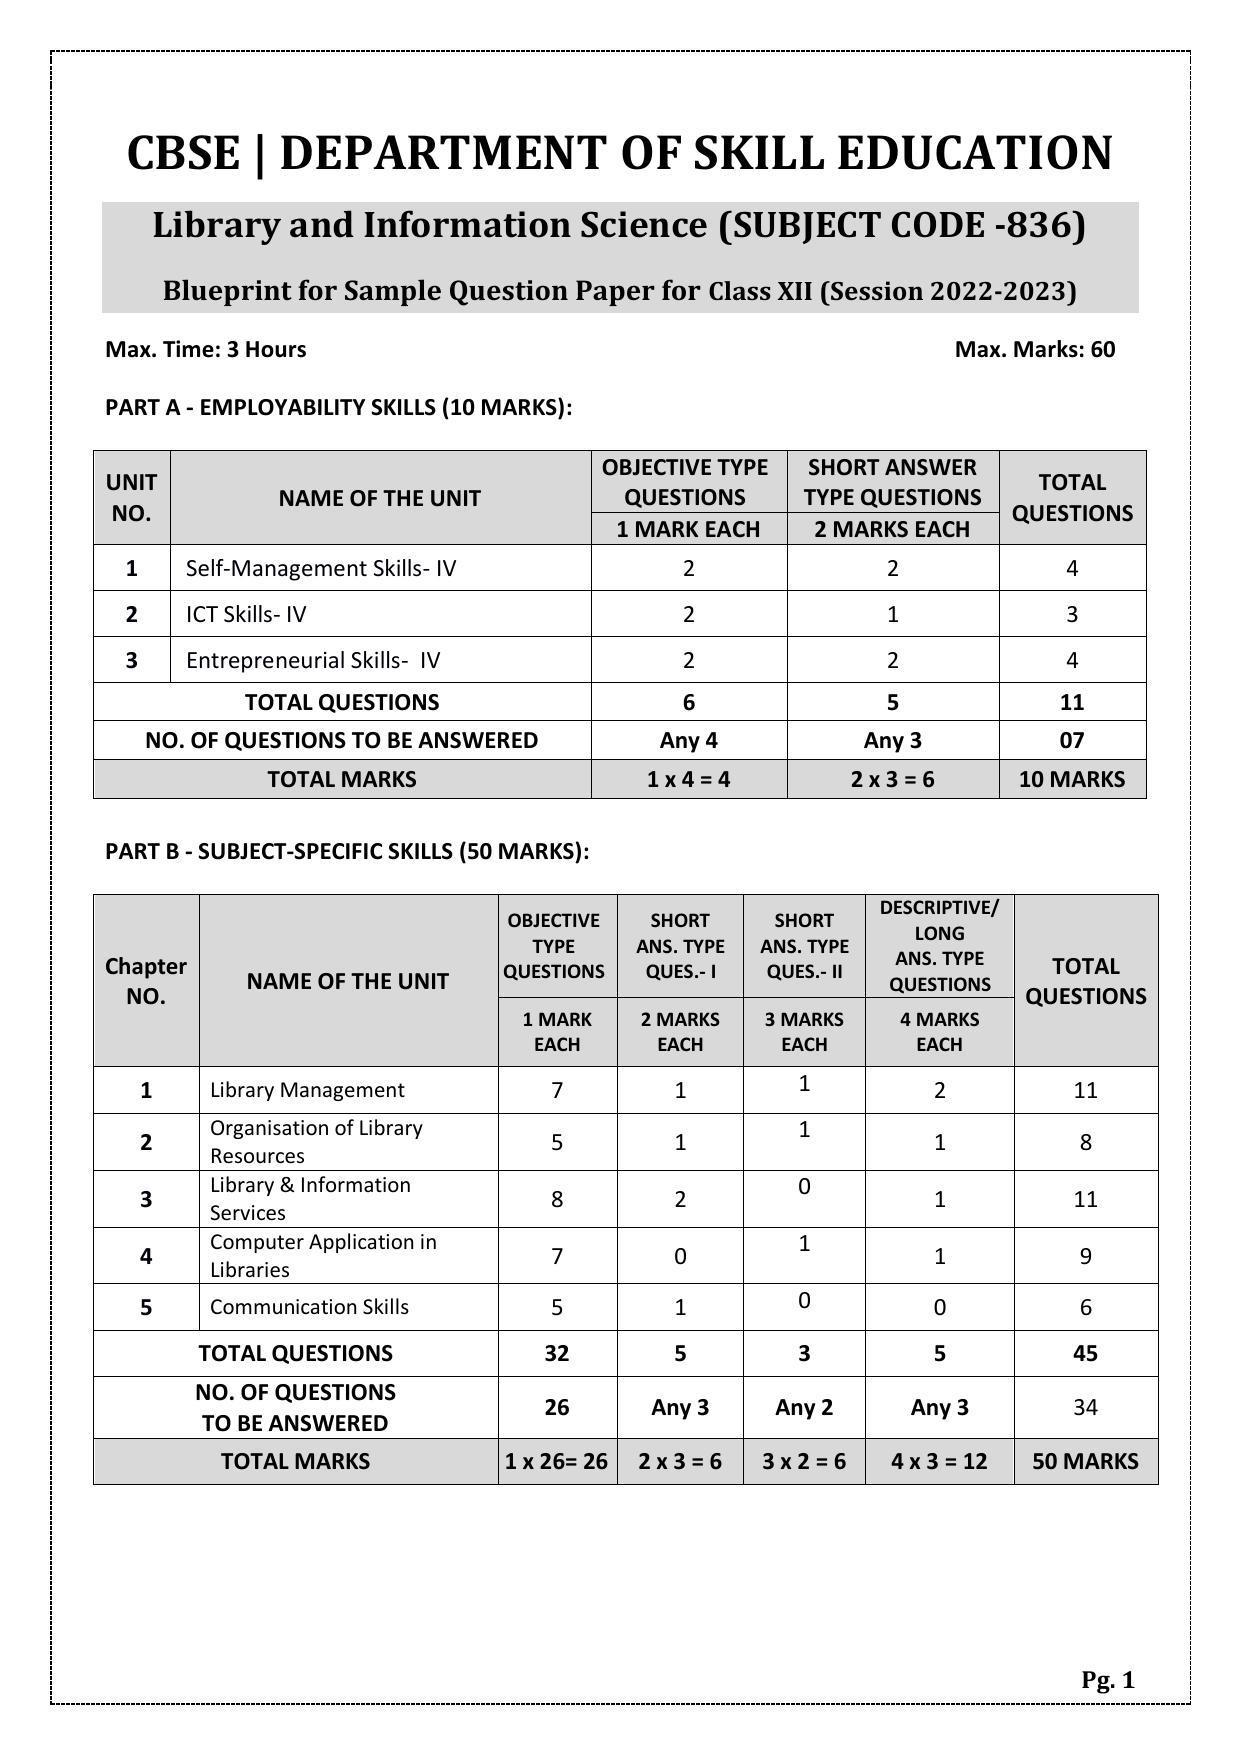 CBSE Class 10 Library & Information Science (Skill Education) Sample Papers 2023 - Page 1